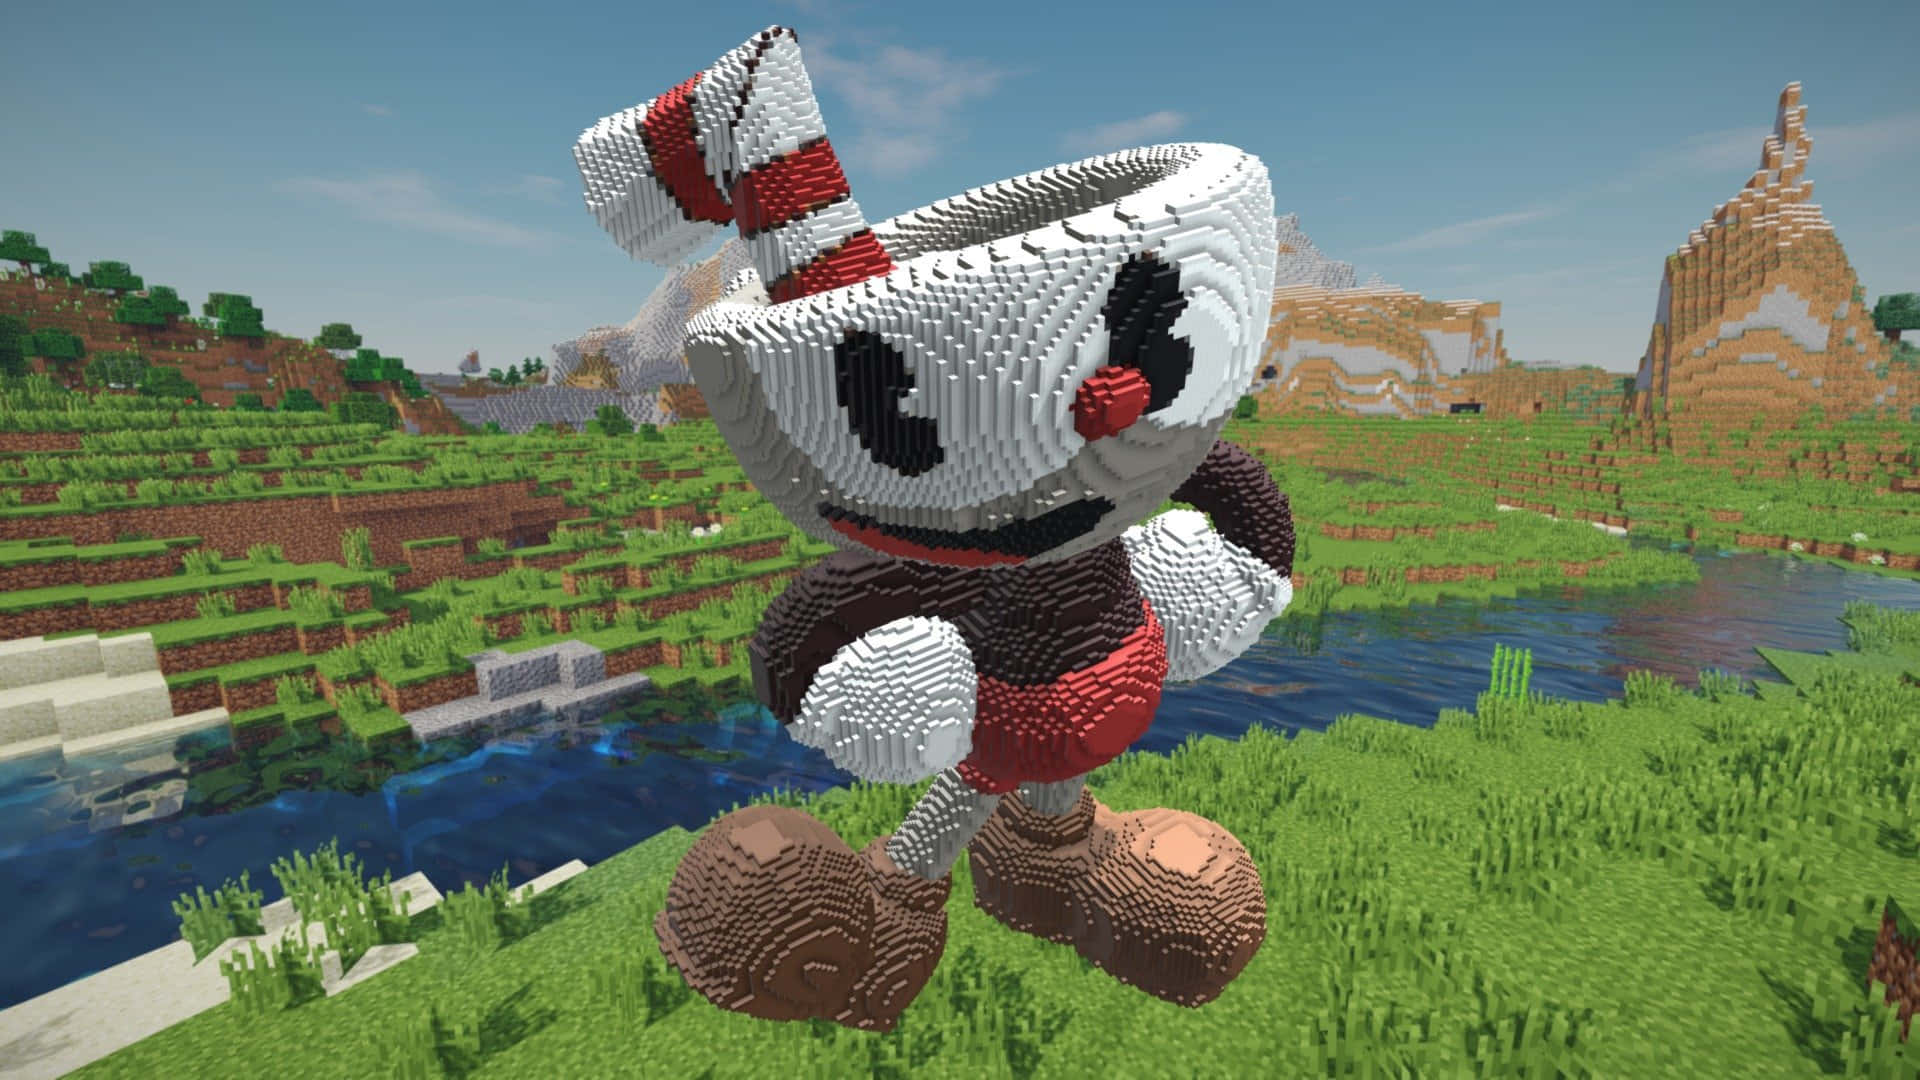 Game on, Play as Cuphead!